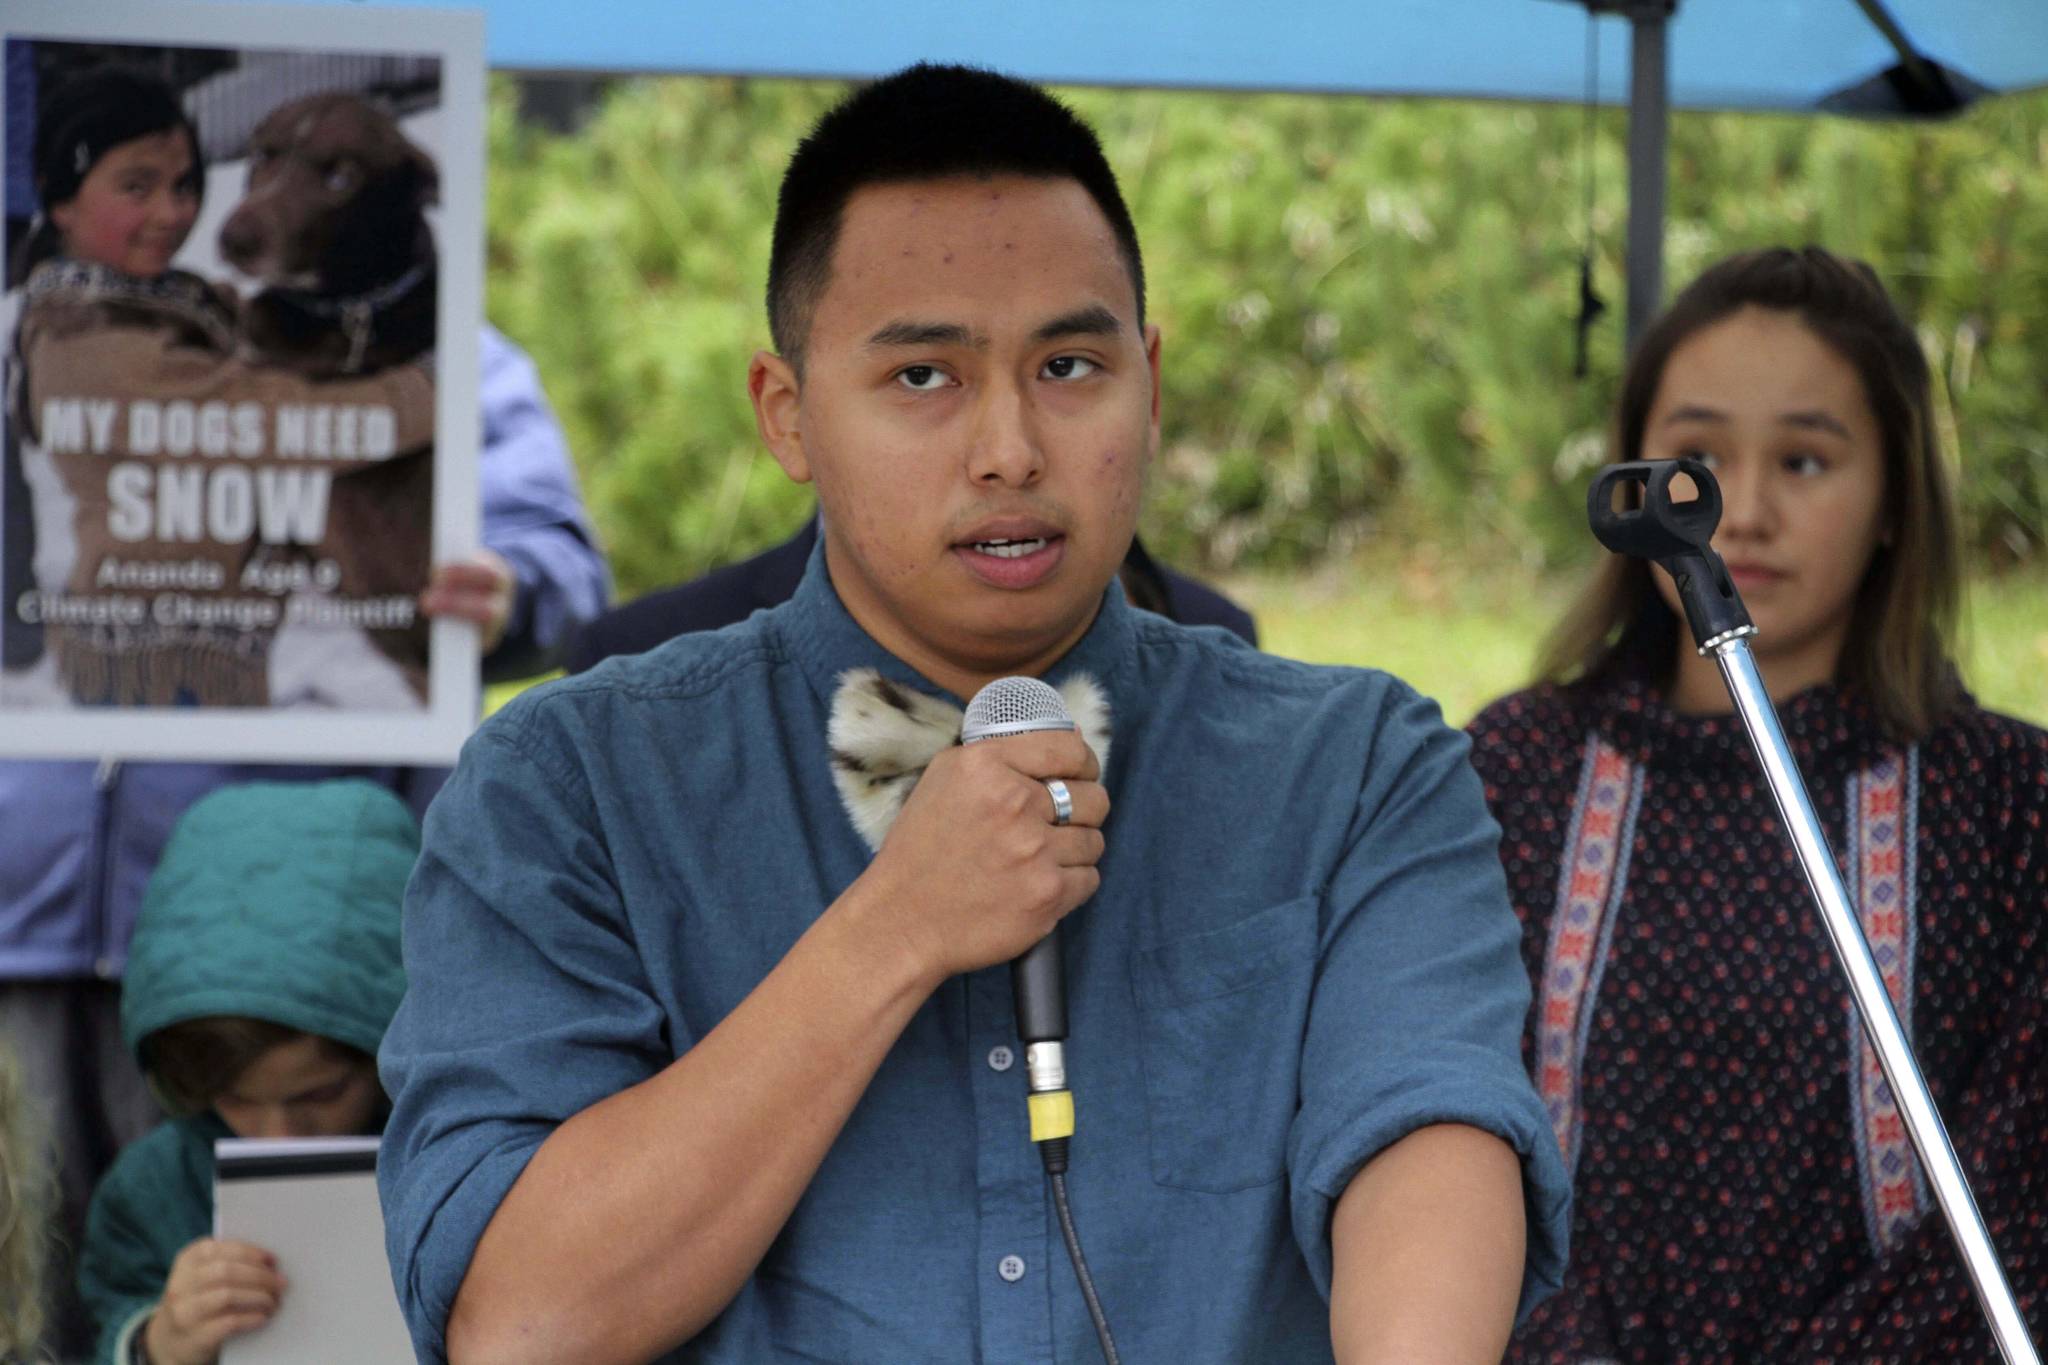 Esau Sinnok of Shishmaref speaks at a news conference after the Alaska Supreme Court heard arguments Wednesday in Anchorage in a lawsuit that claims state policy on fossil fuels is harming the constitutional right of young Alaskans to a safe climate. Sinnok and 15 other Alaska youths in 2017 sued the state, claiming that human-caused greenhouse gas emission leading to climate change is creating long-term, dangerous health effects. They lost in Superior Court, but appealed to Alaska’s highest court. (AP Photo | Mark Thiessen)